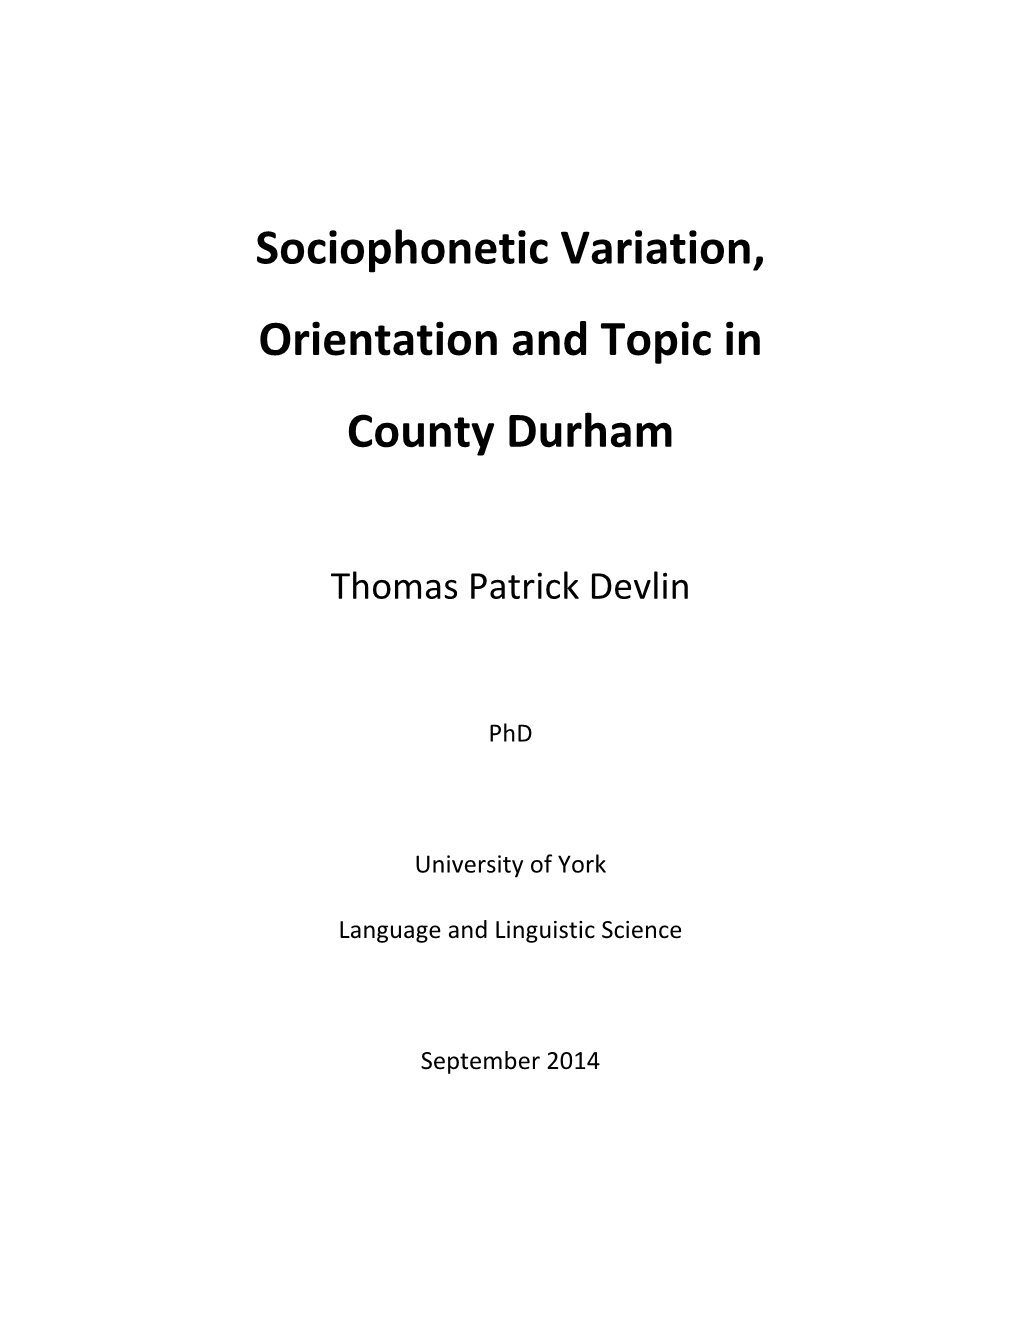 Sociophonetic Variation, Orientation and Topic in County Durham